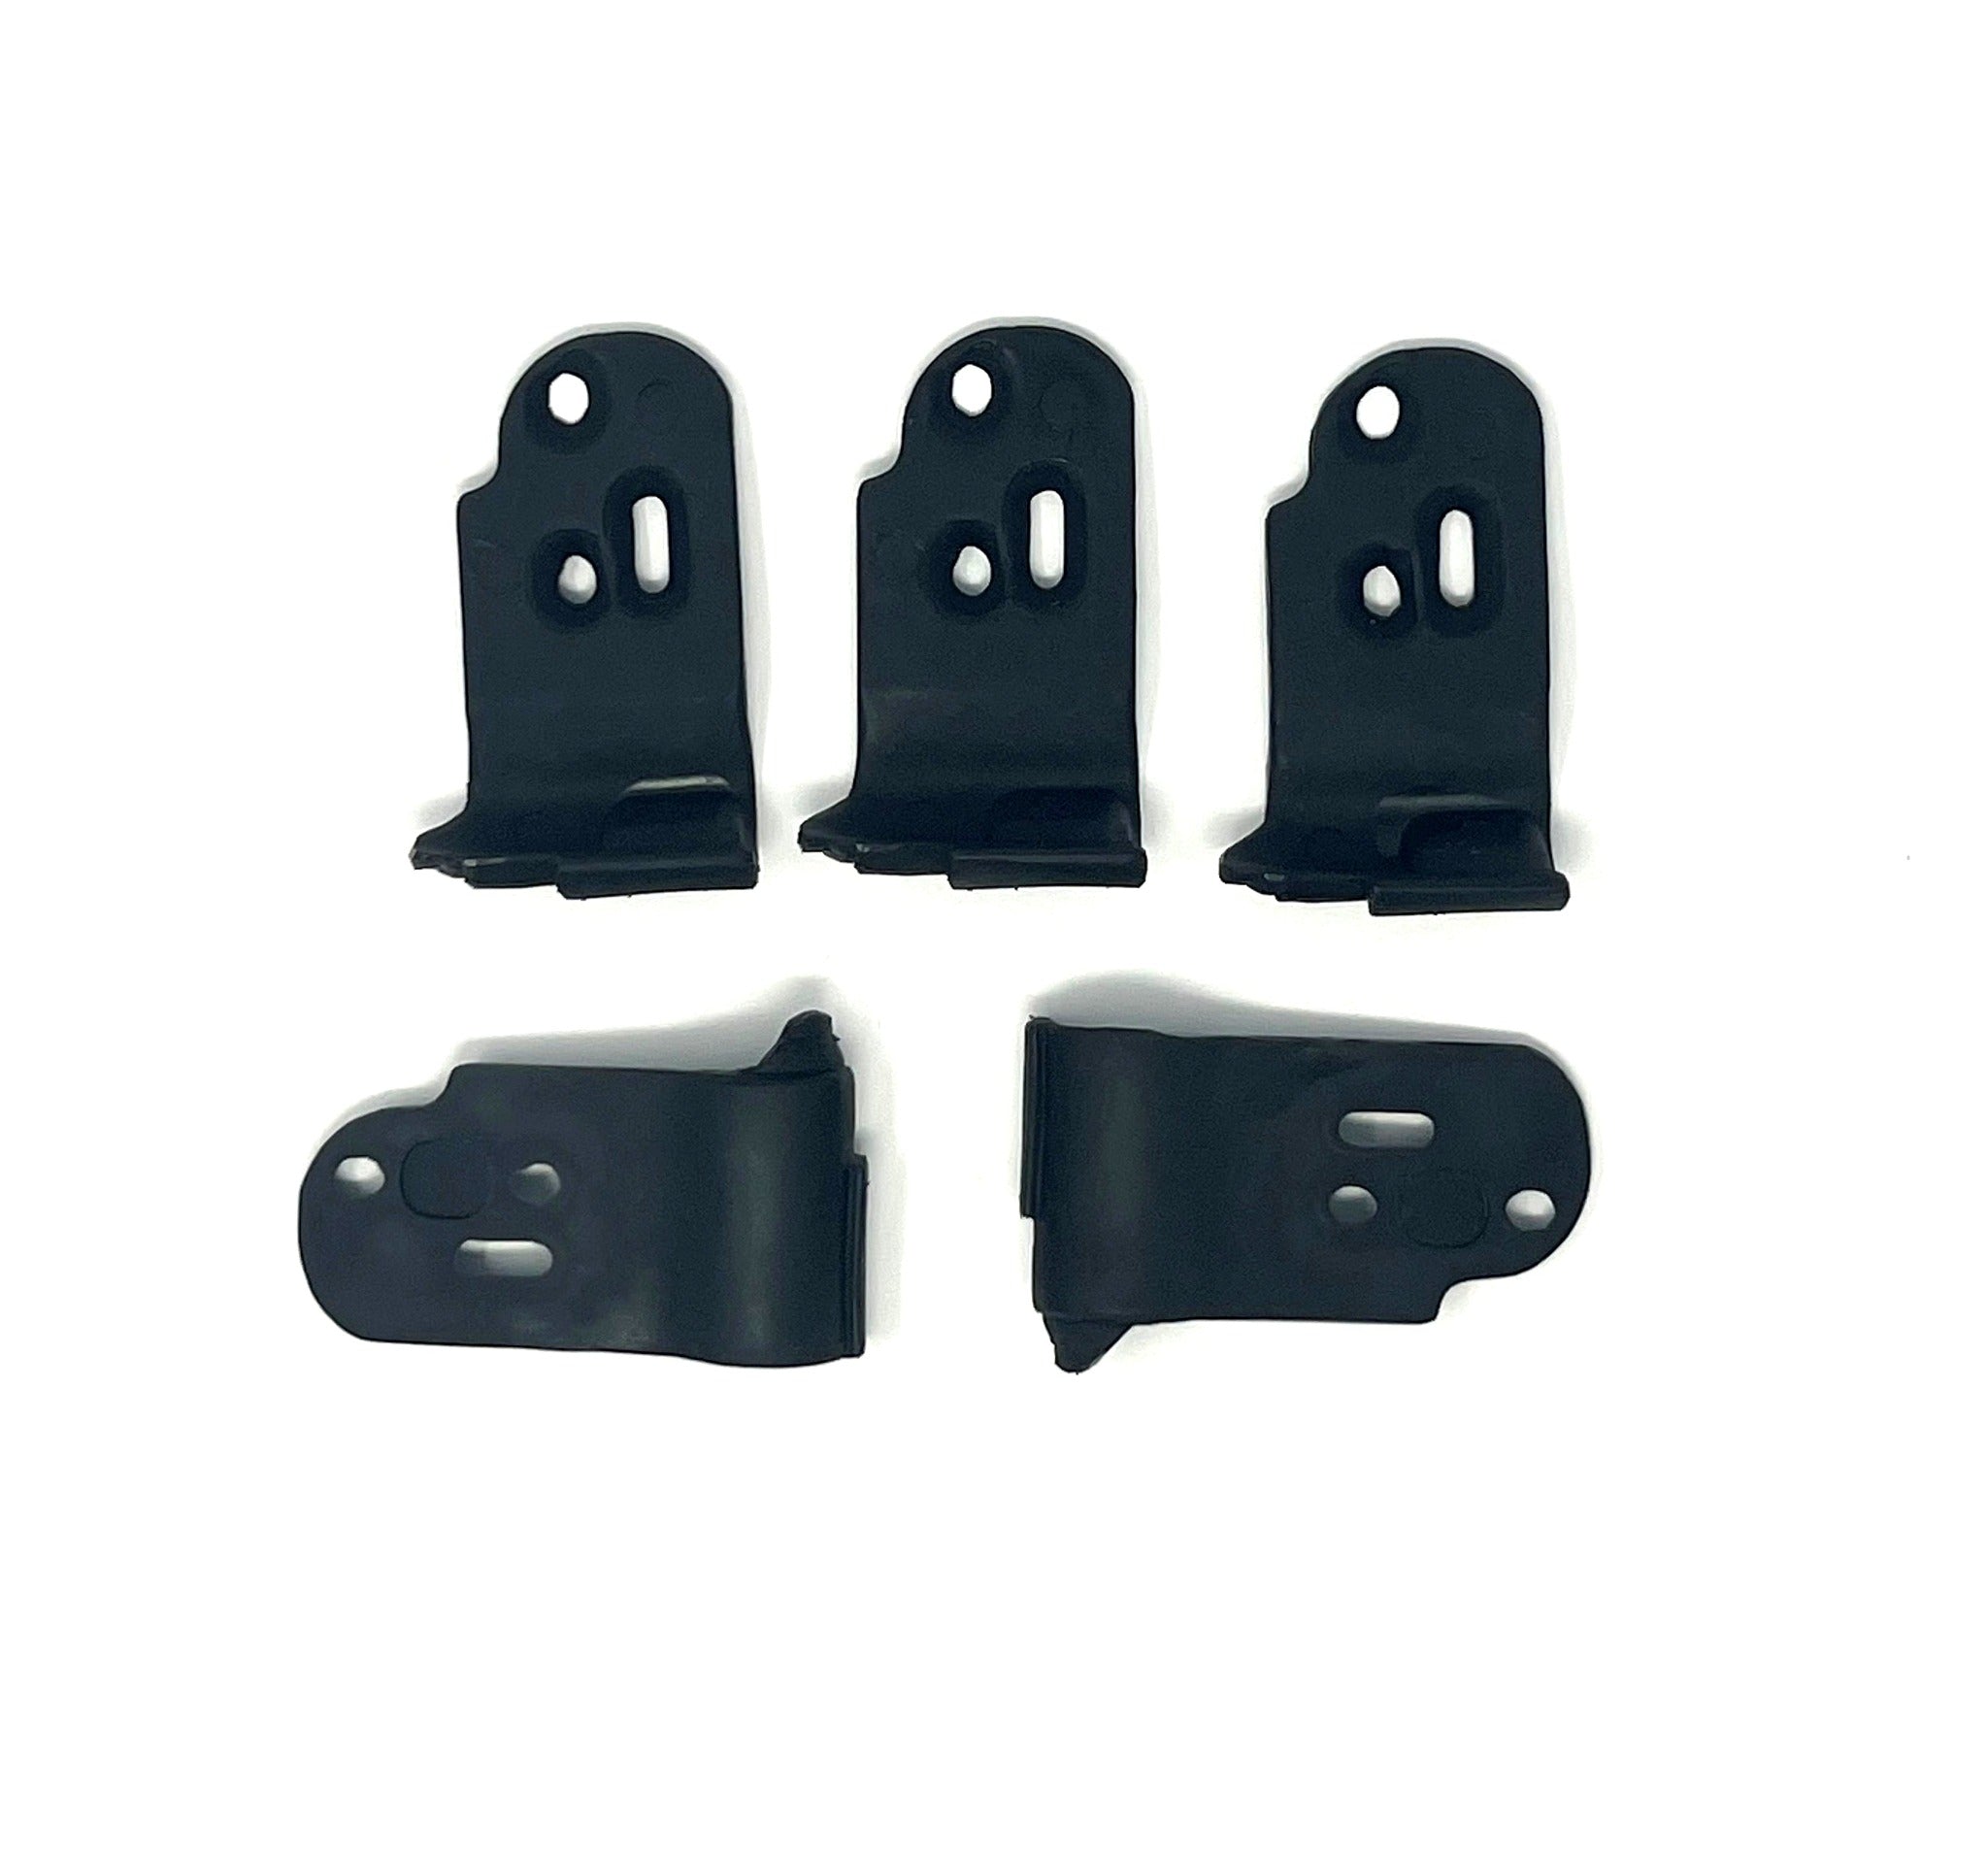 Coats Front/hook inserts for lever less Tire Changer   5PK